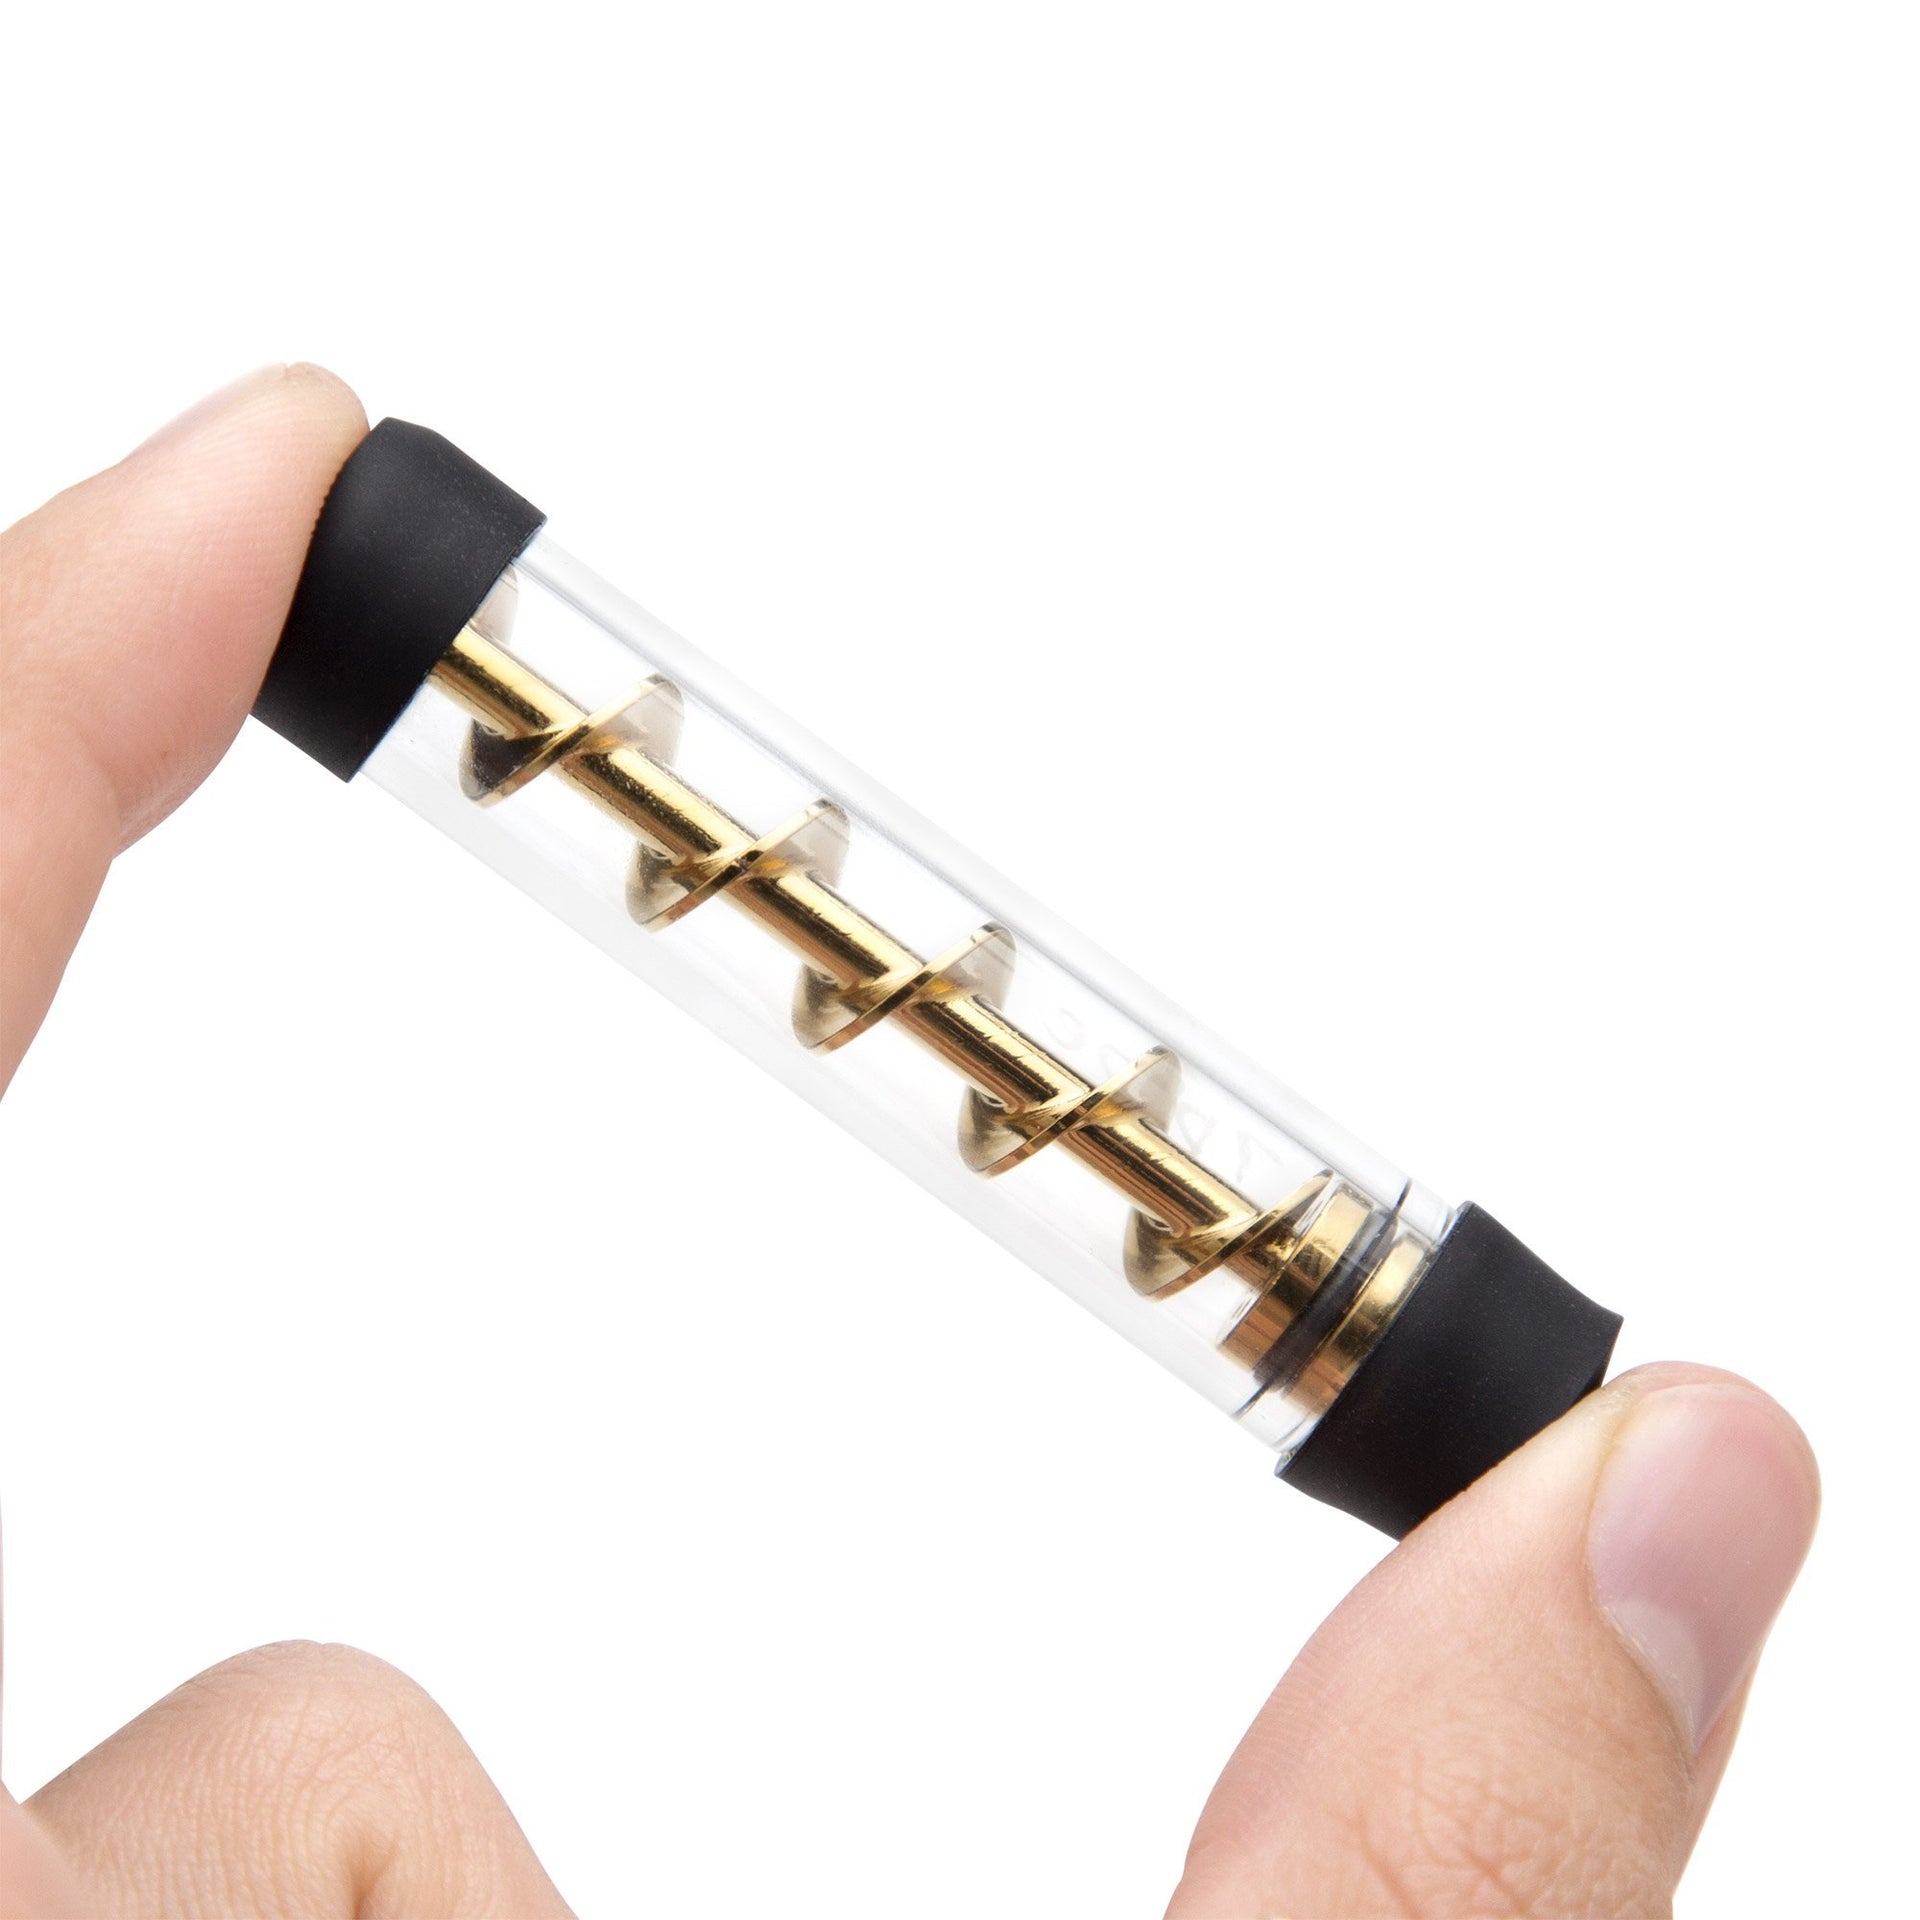 New Pipe Twisty Glass Blunt – The Awesome Co